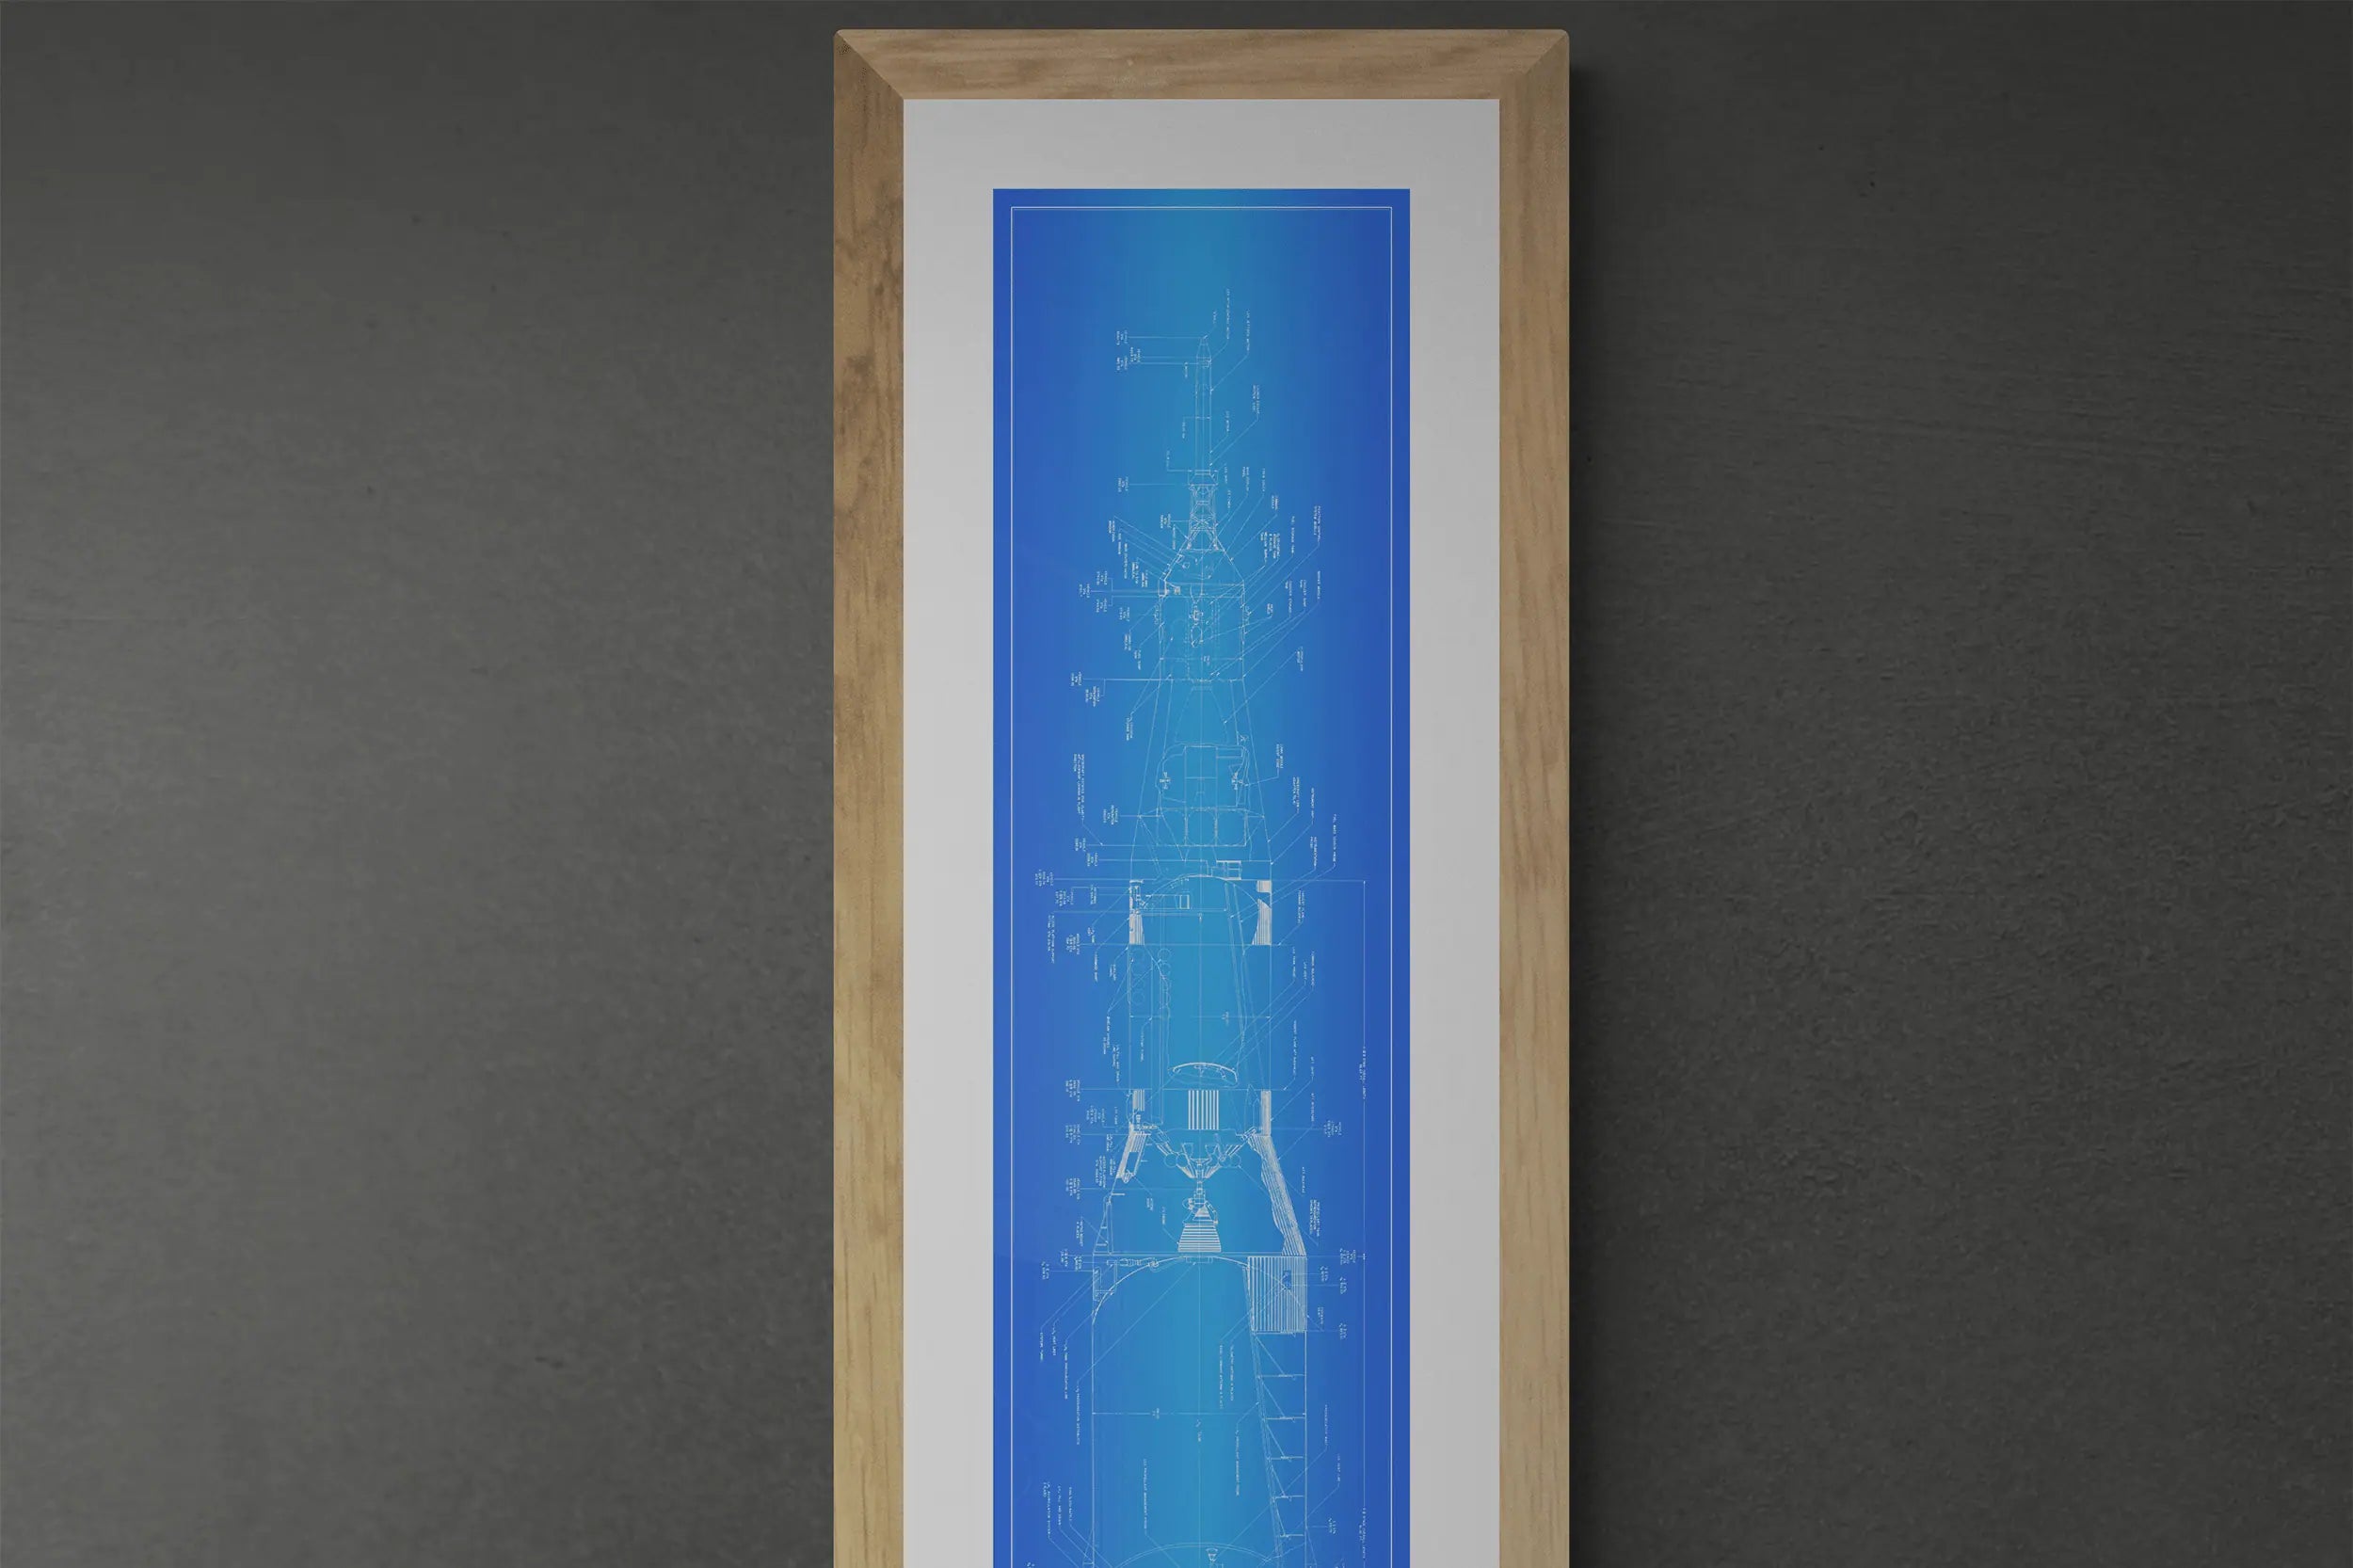 Rocket Posters | NASA | A vertical framed blueprint poster of the Saturn V rocket is displayed on a dark wall. The poster features detailed technical drawings in blue, enclosed in a wooden frame.